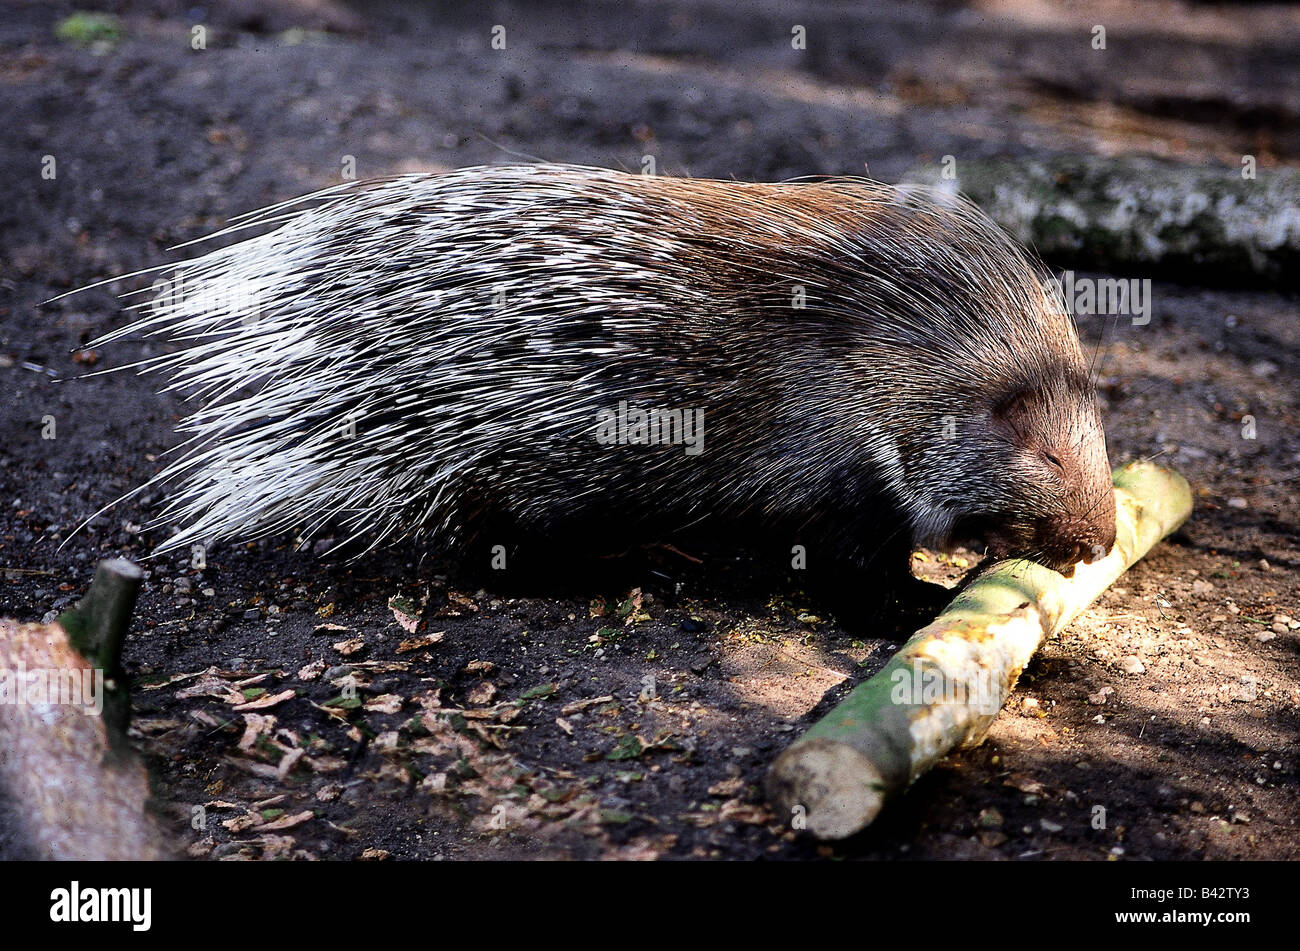 zoology / animals, mammal / mammalian, North African Crested Porcupine, (Hystrix cristata), nibbling at stick, distribution: Nor Stock Photo